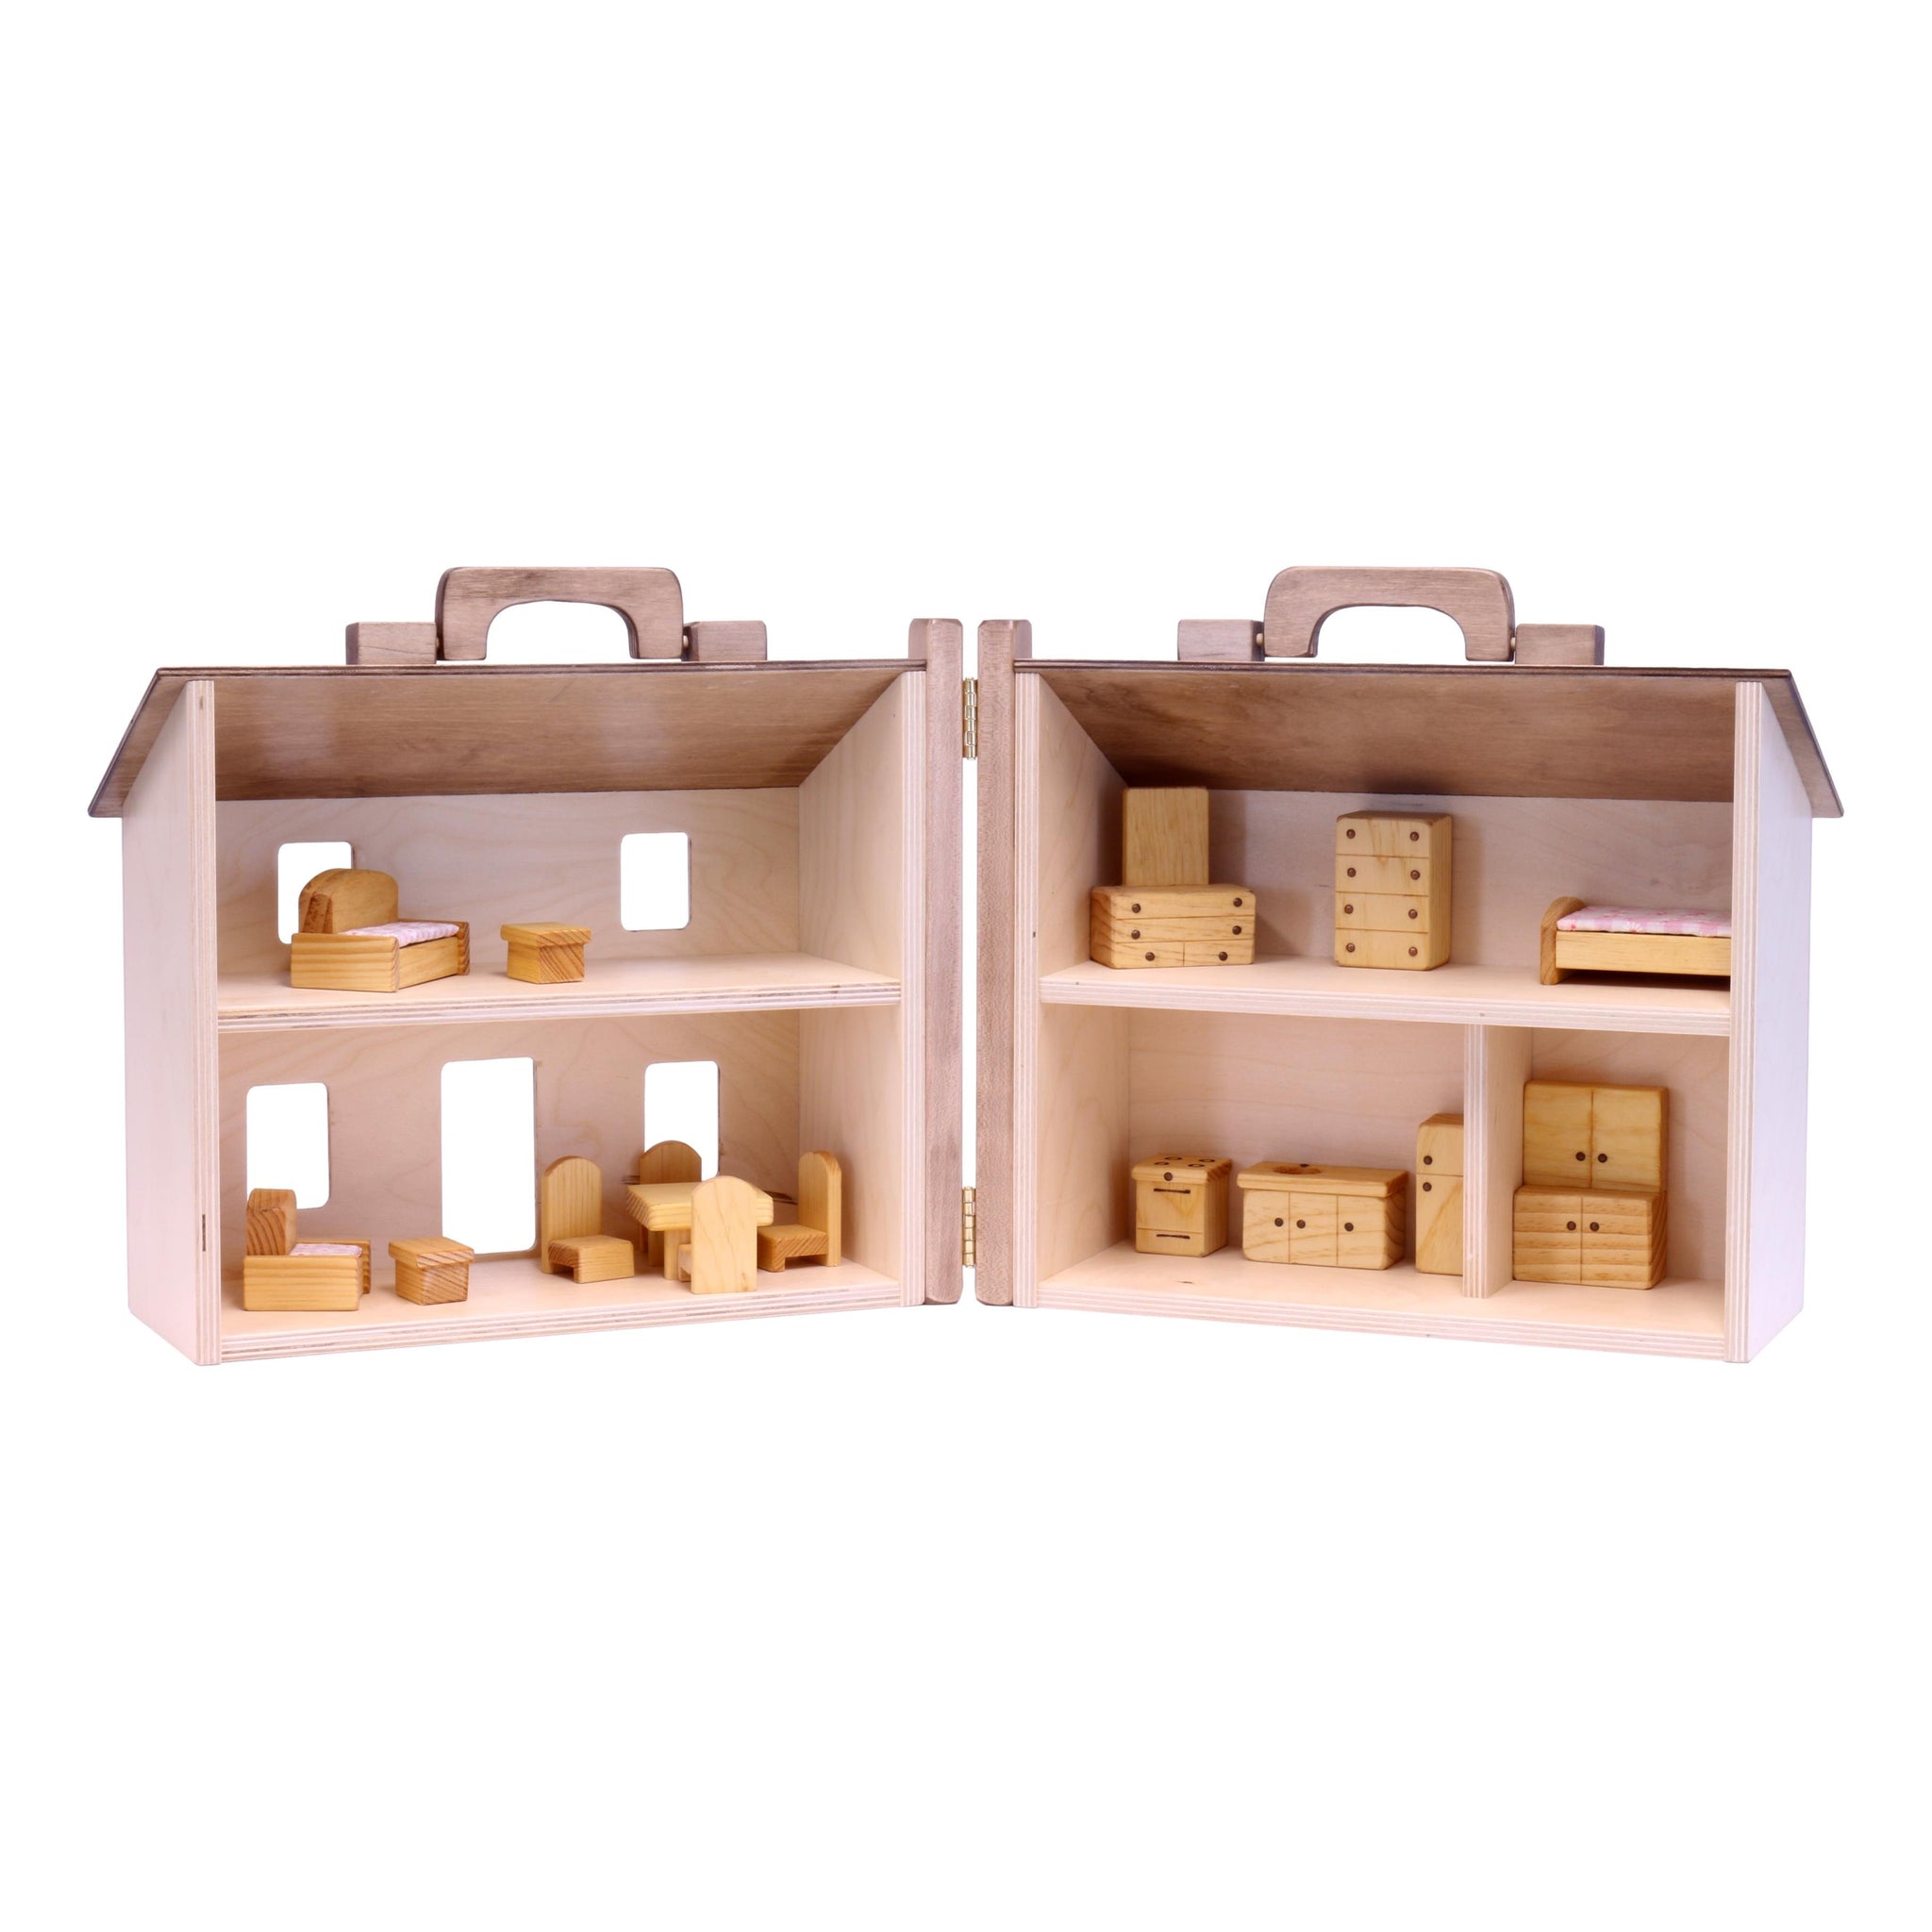 New and used Wooden Dolls Houses for sale